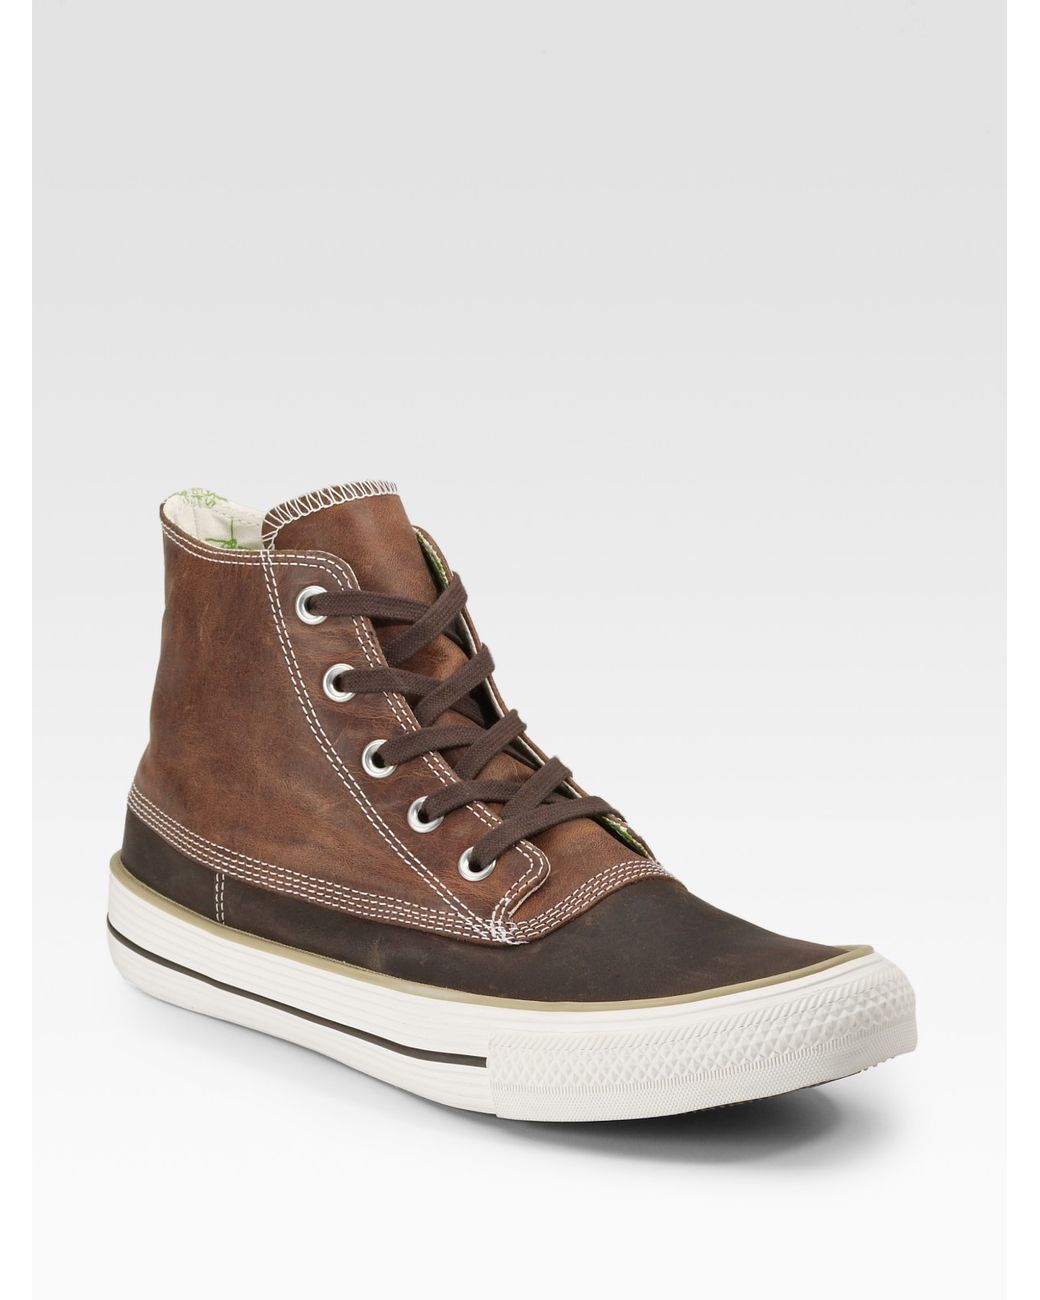 Converse Chuck Taylor Leather Duck Ankle Boots Brown for Men | Lyst